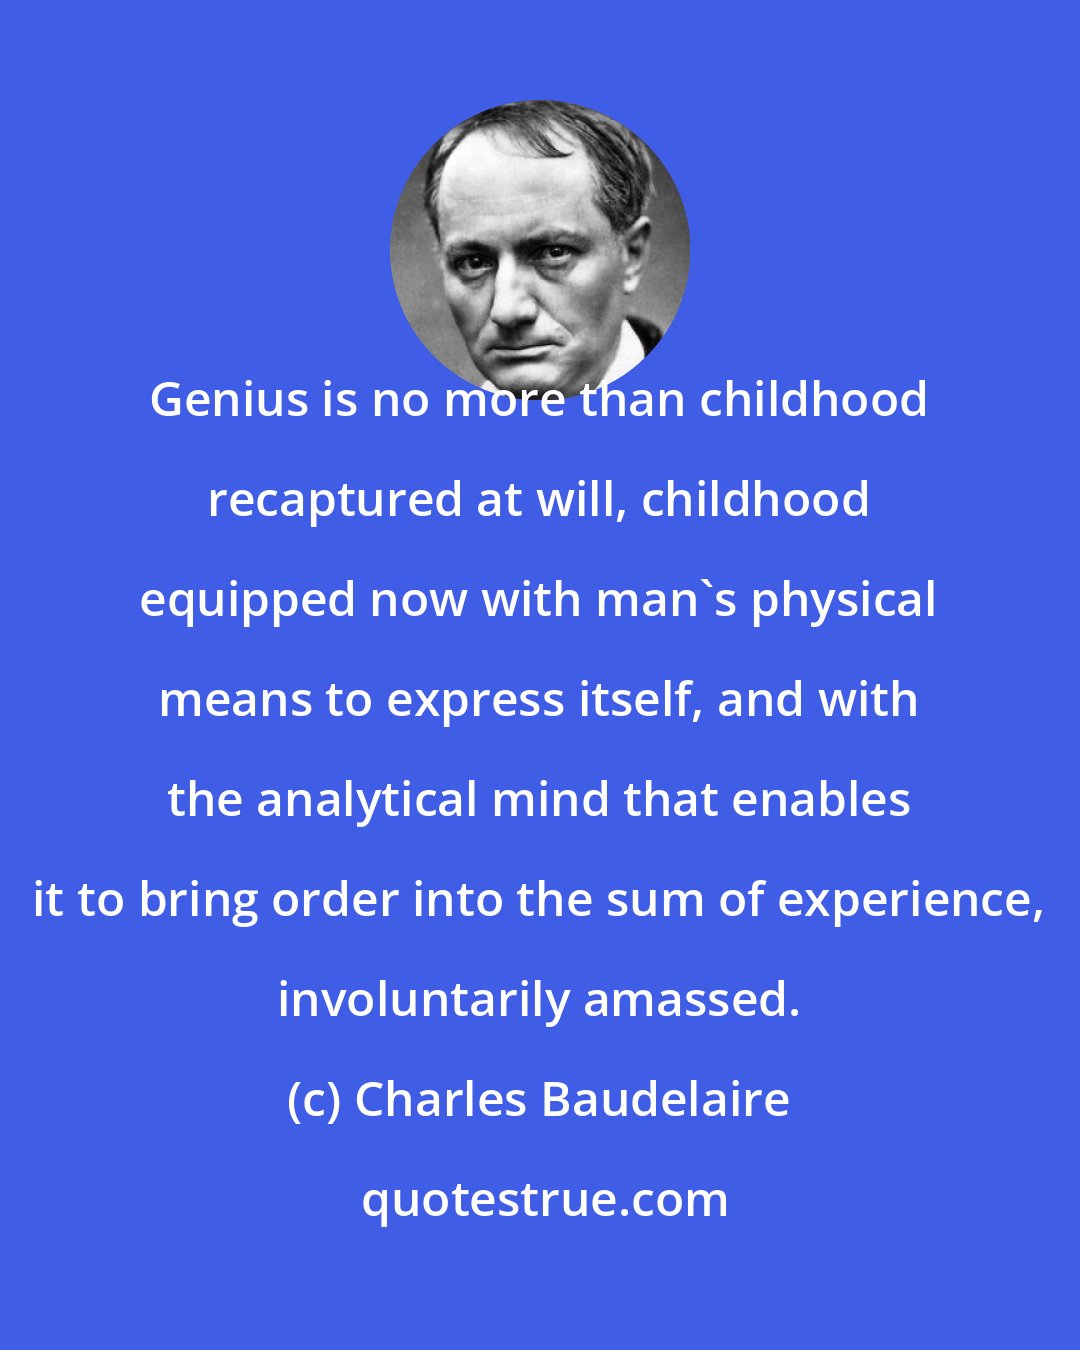 Charles Baudelaire: Genius is no more than childhood recaptured at will, childhood equipped now with man's physical means to express itself, and with the analytical mind that enables it to bring order into the sum of experience, involuntarily amassed.